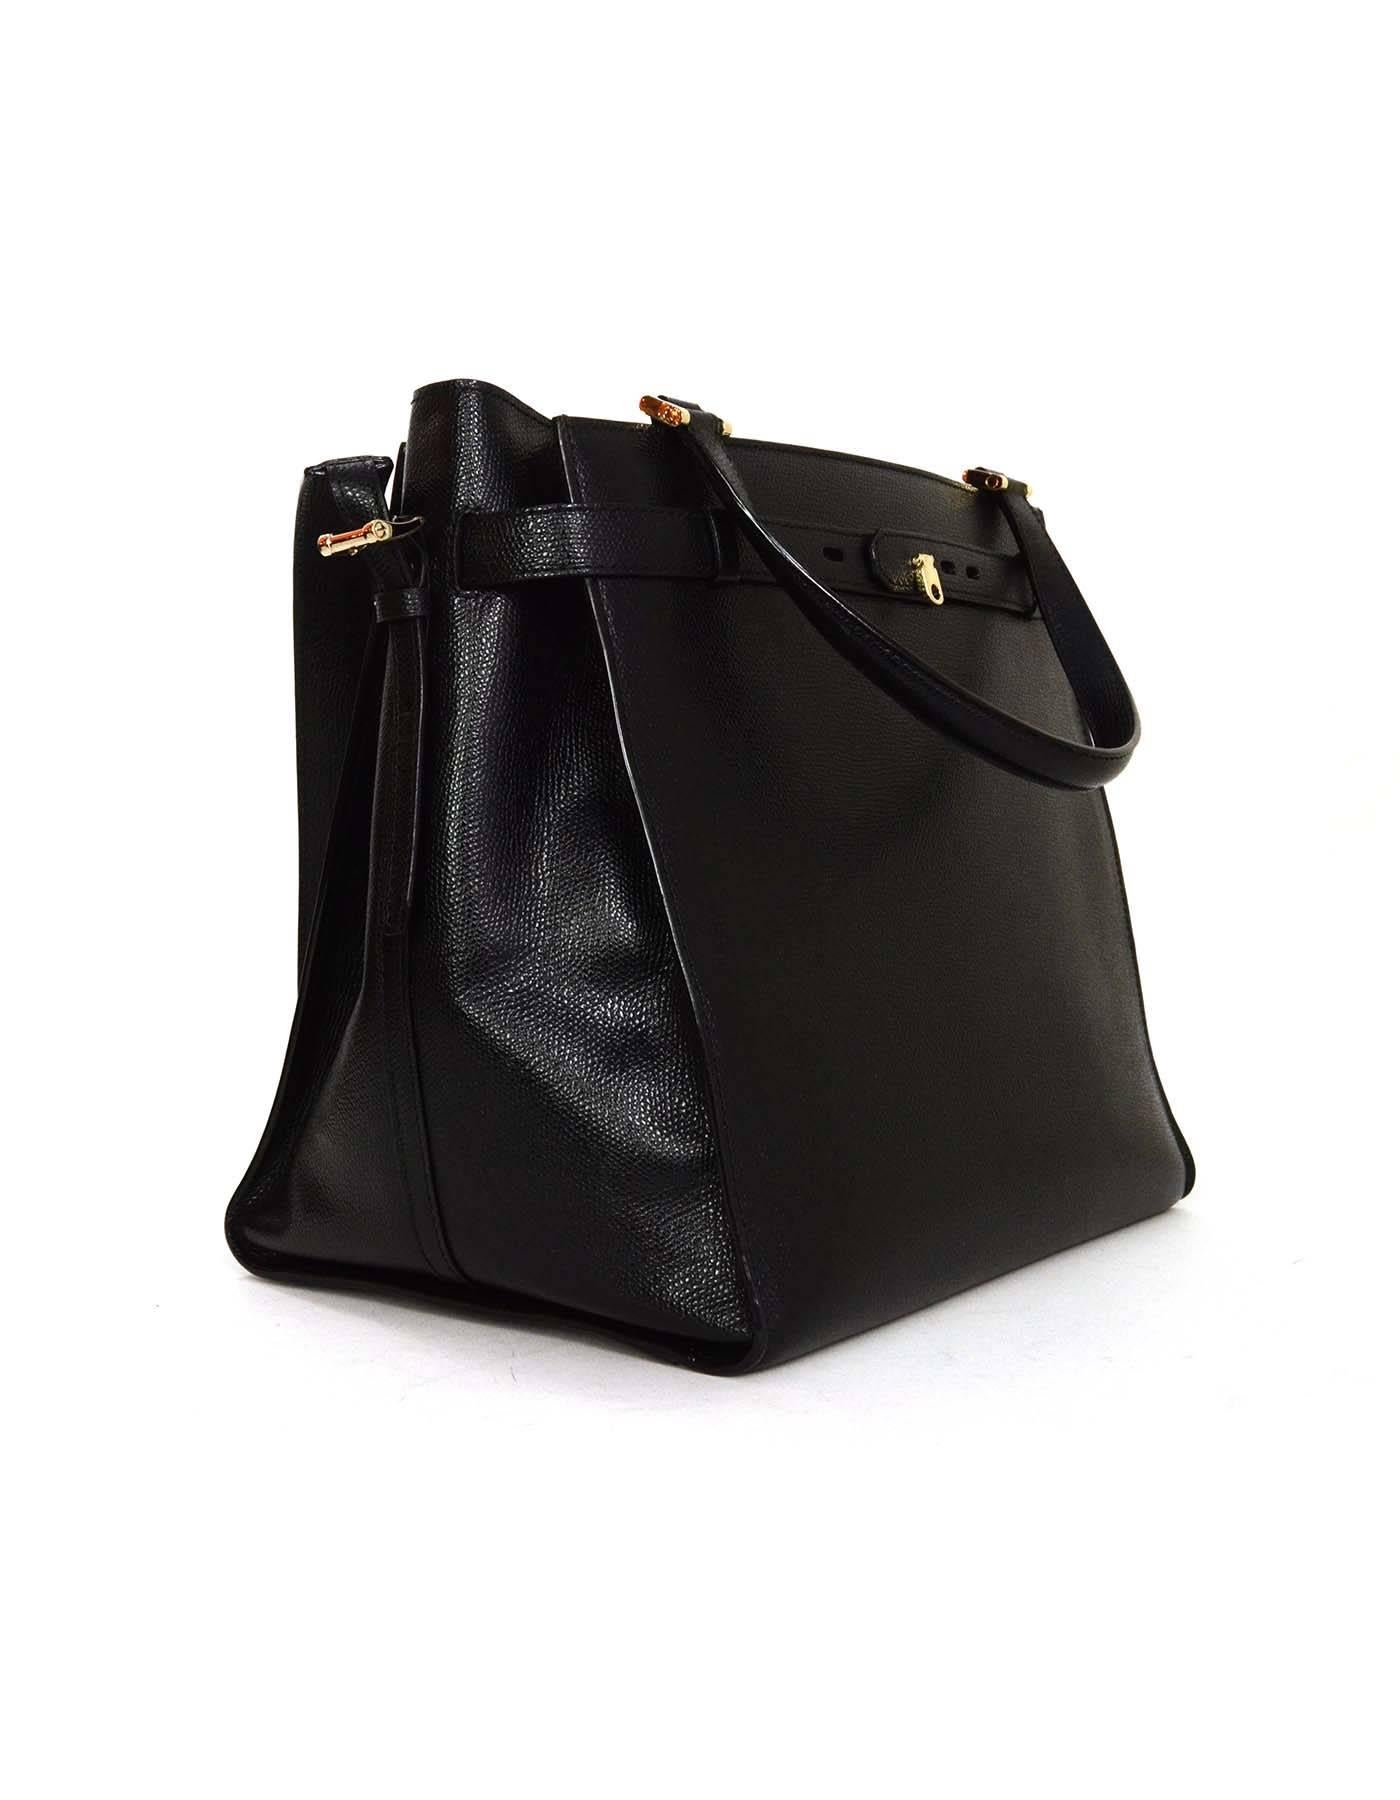 Valextra Black Textured Leather Large B-Cube Tote Bag SHW 
Features adjustable wrap-around strap detail

Made In: Italy
Color: Black
Hardware: Silvertone
Materials: Textured leather
Lining: Ivory and black leather
Closure/Opening: Open top